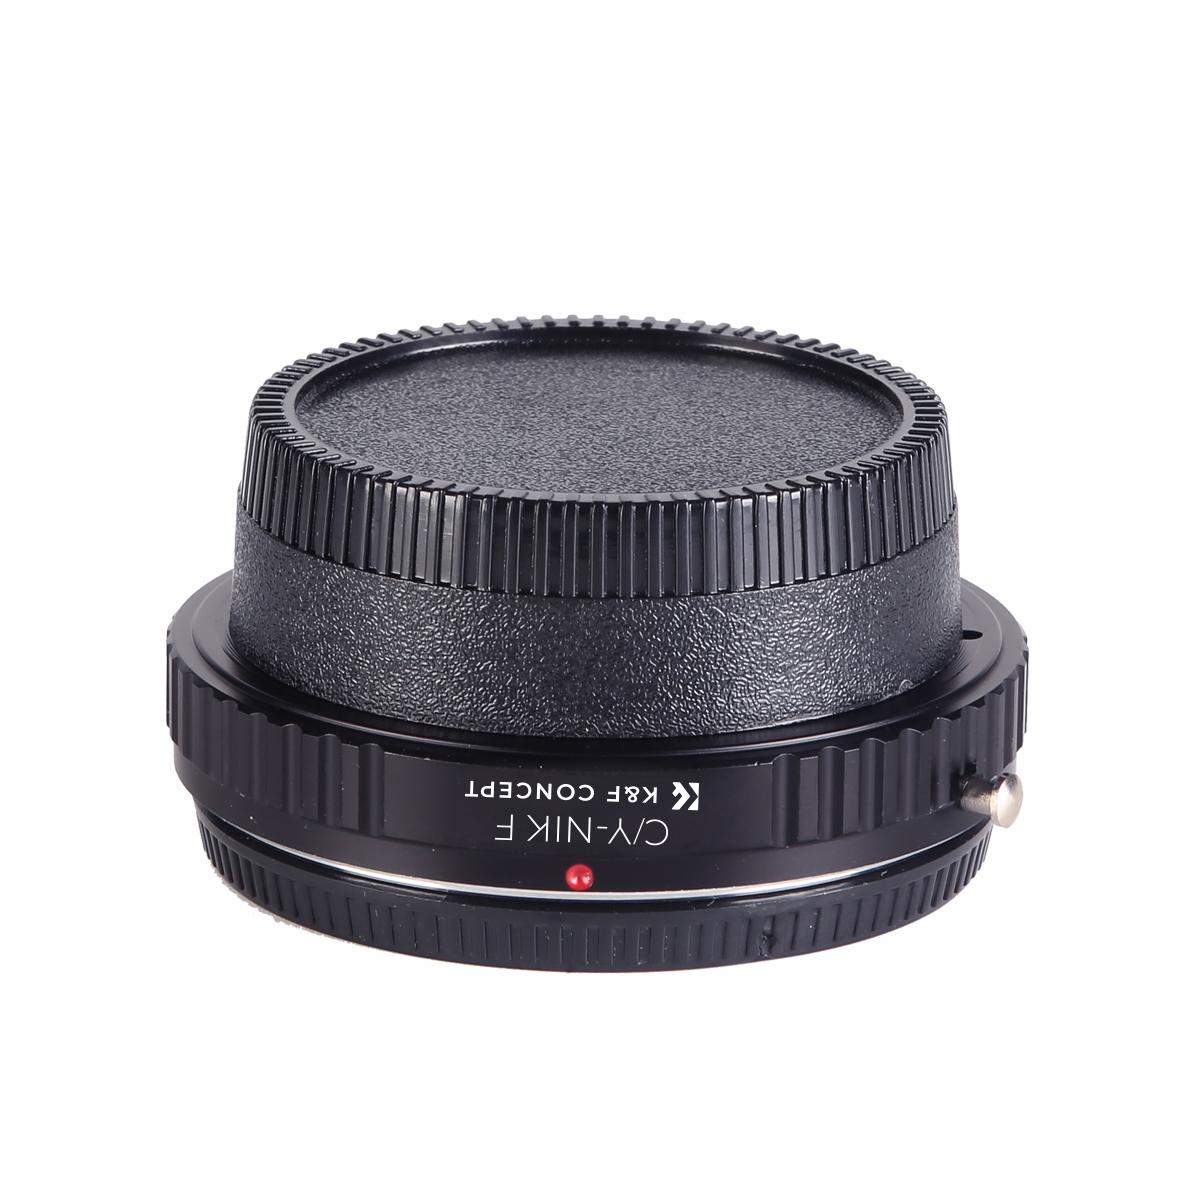 Contax Yashica Lenses to Nikon F Lens Mount Adapter with Optic Glass K&F Concept M14171 Lens Adapter